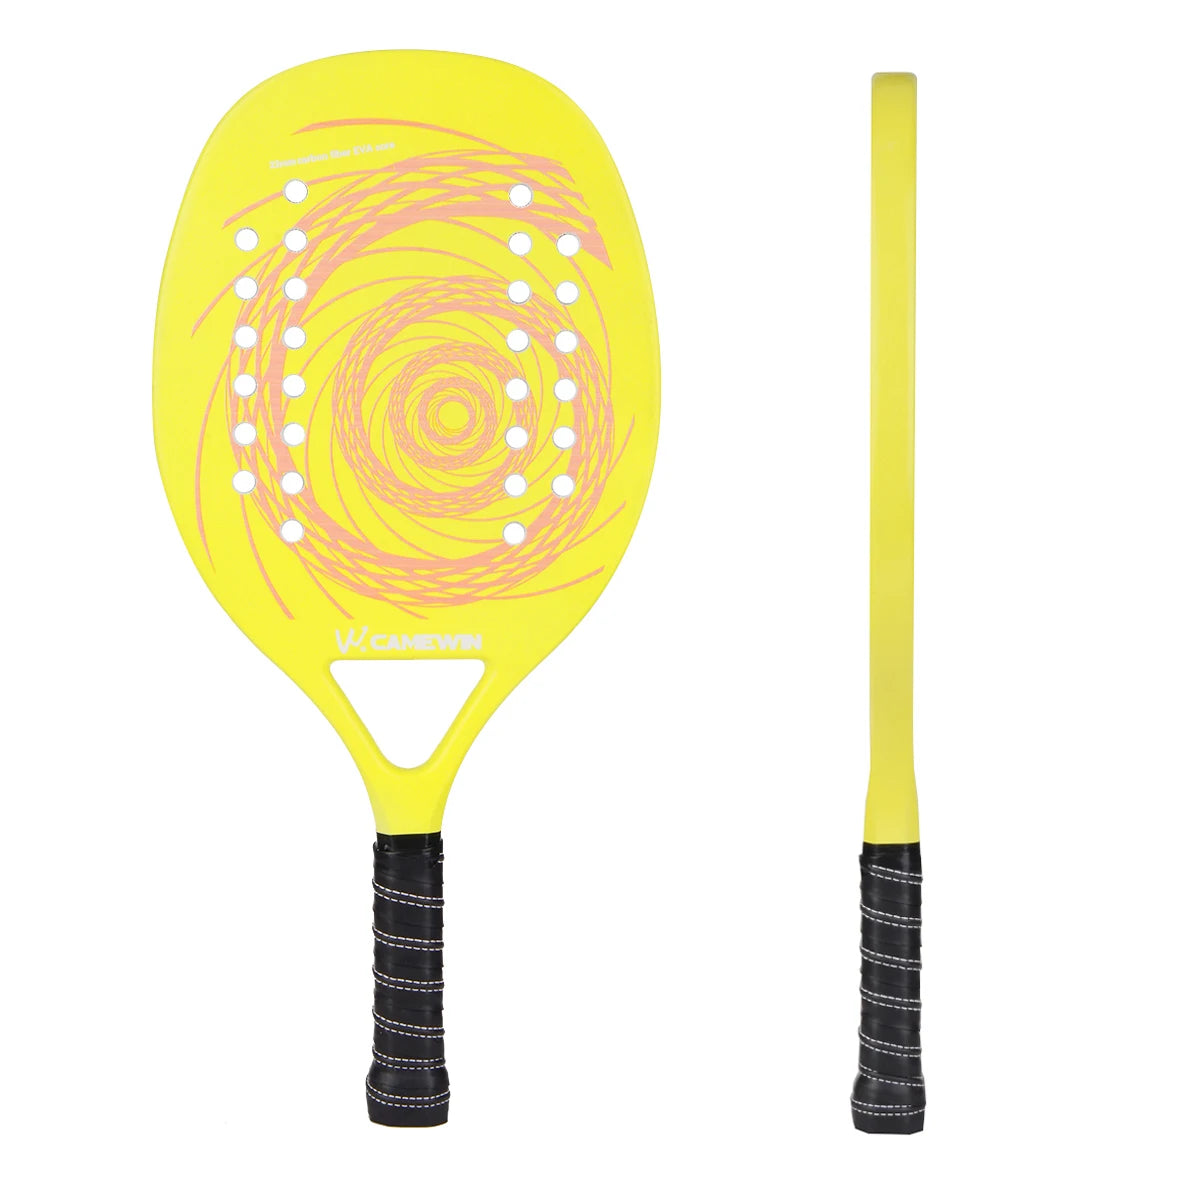 High Quality 3K Carbon and Glass Fiber Beach Tennis Racquet with Bag and Ball